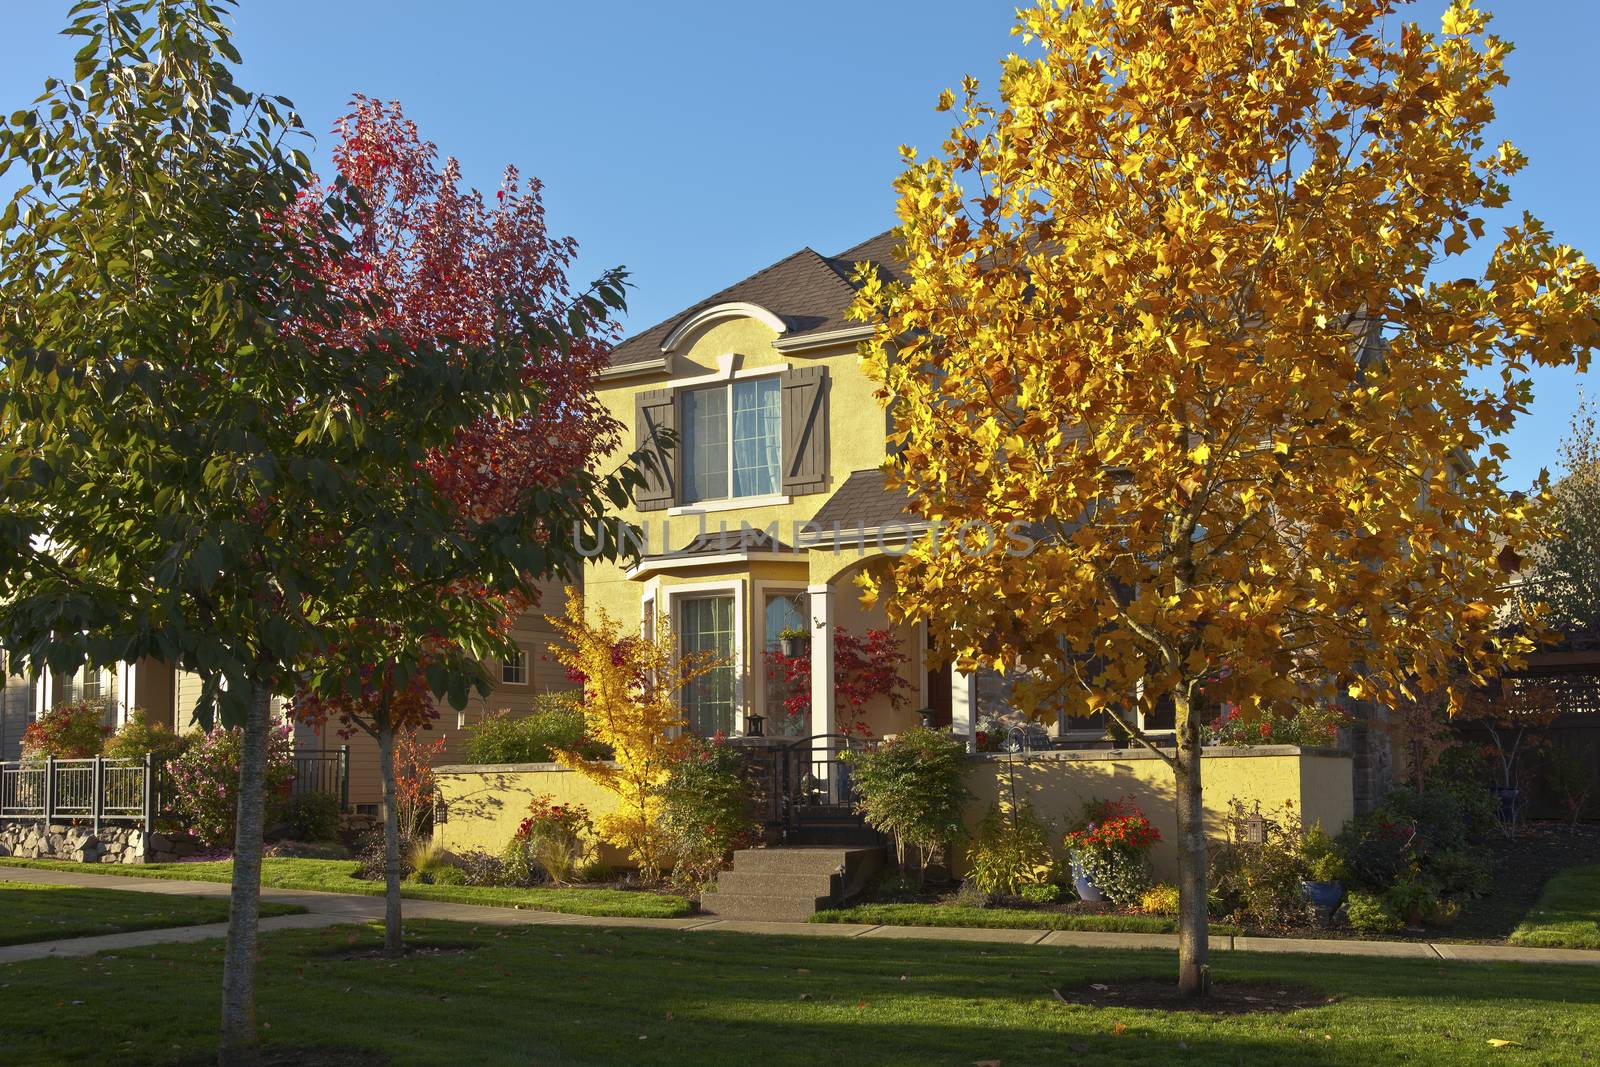 Family home and Autumn colors in Wilsonville Oregon.